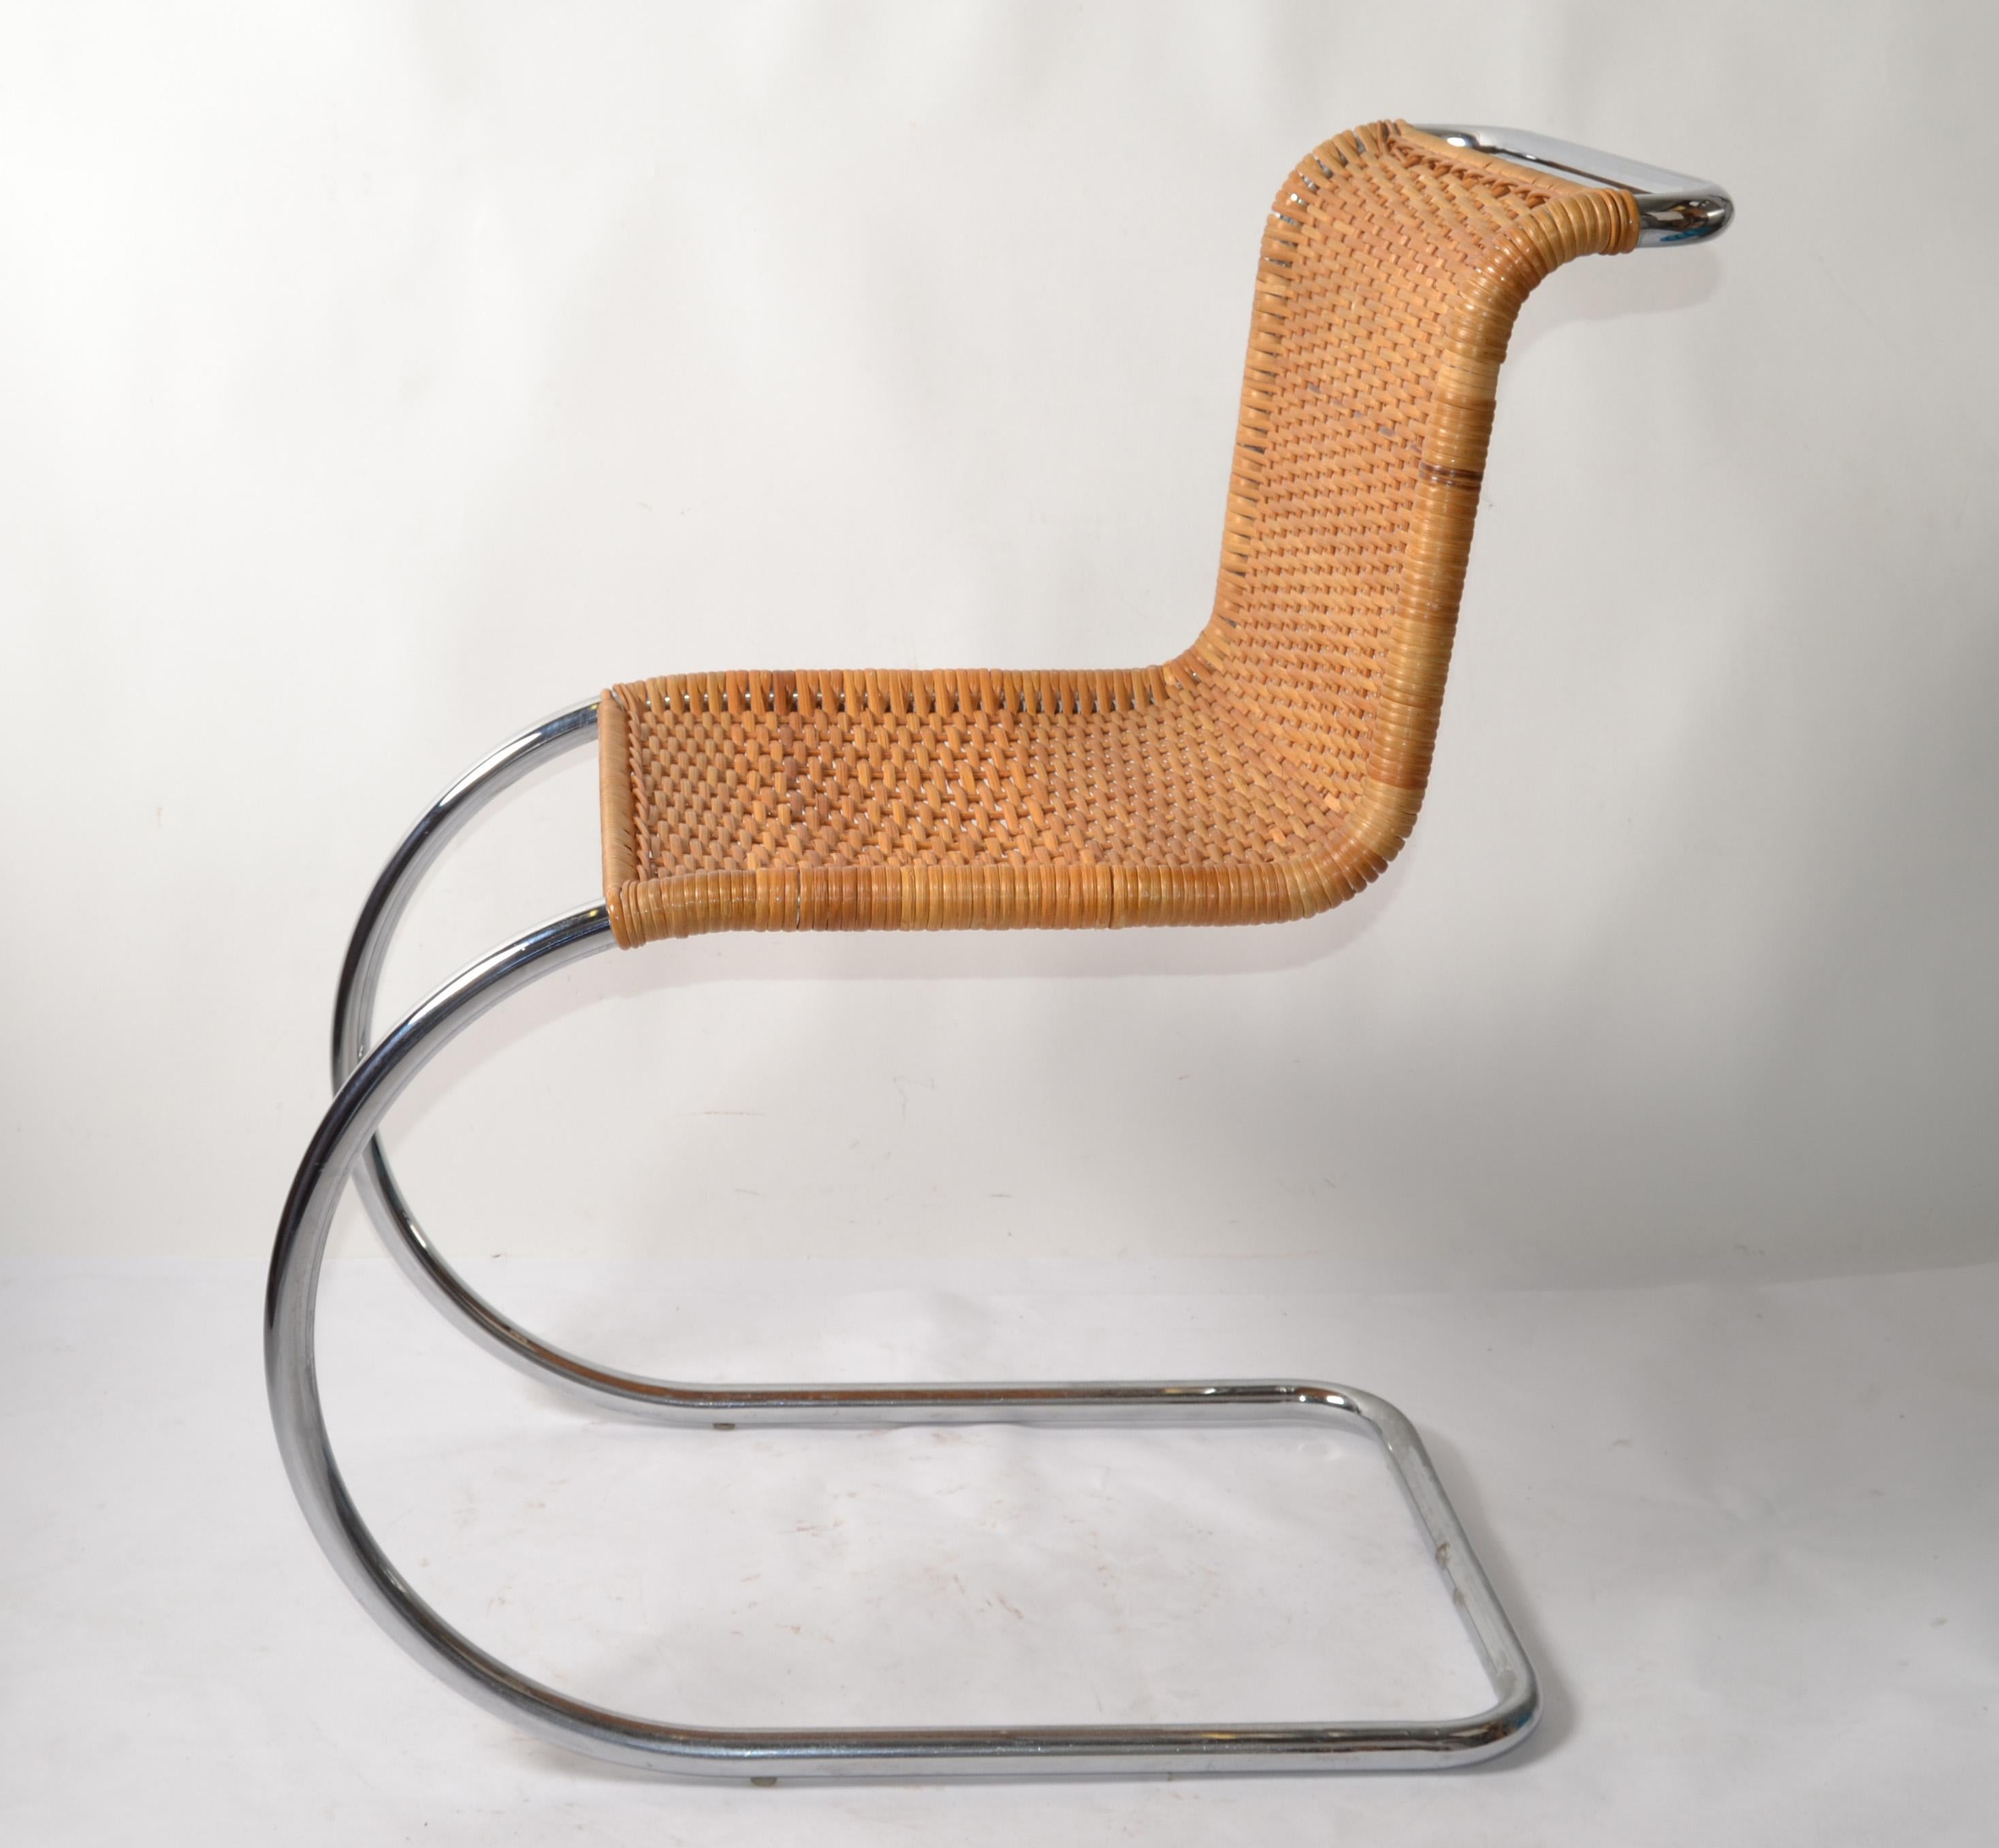 American Tubular Ludwig Mies van der Rohe Attributed Mr Chair Armless Woven Cane Seat 70s For Sale